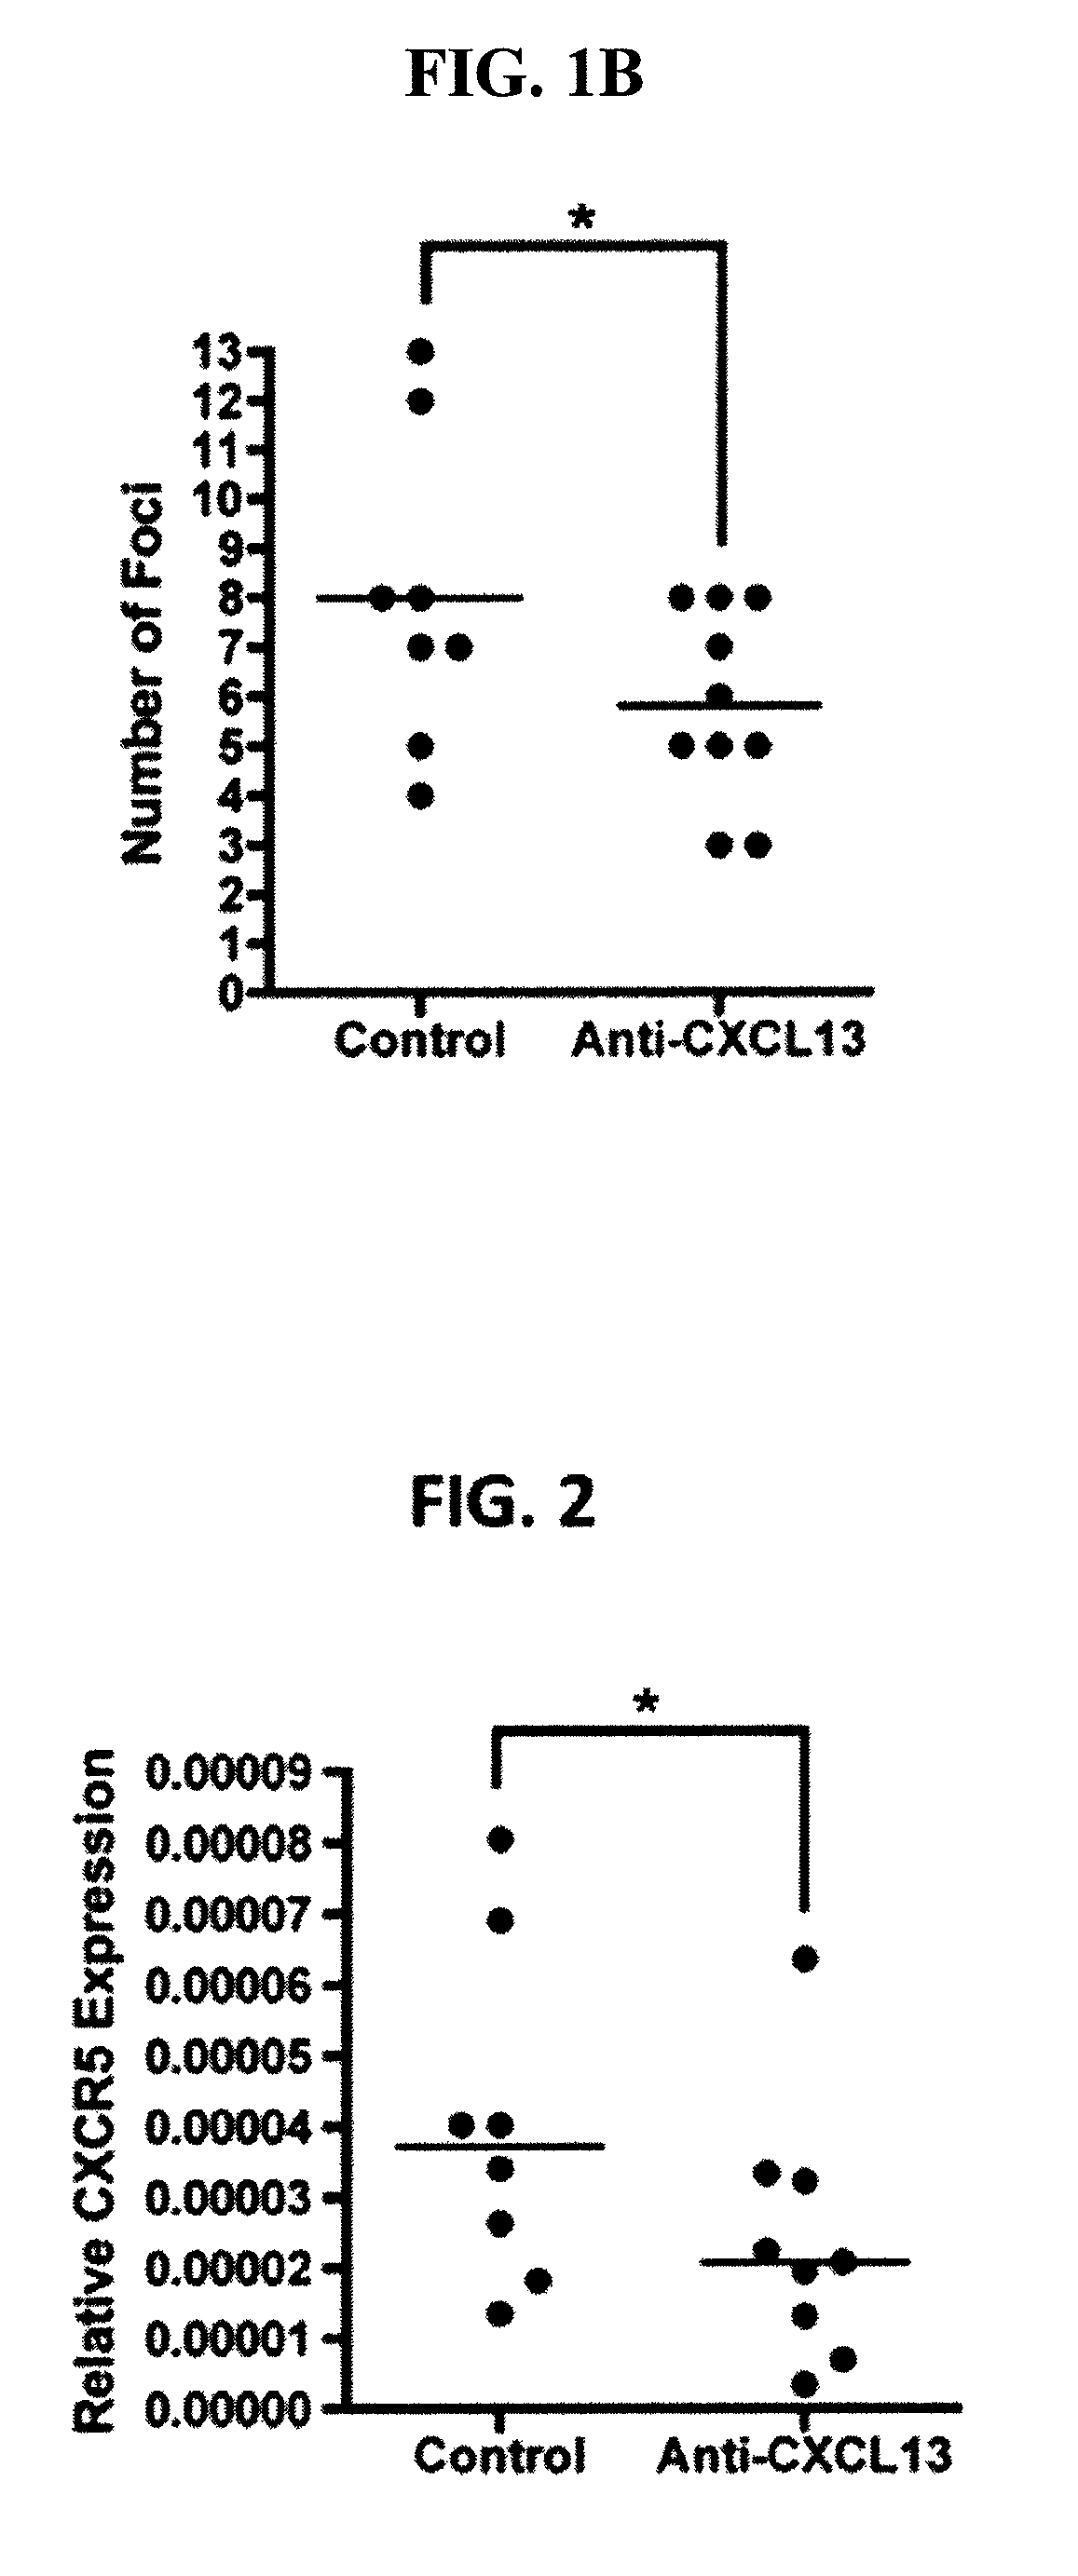 Methods for the treatment of B cell-mediated inflammatory diseases